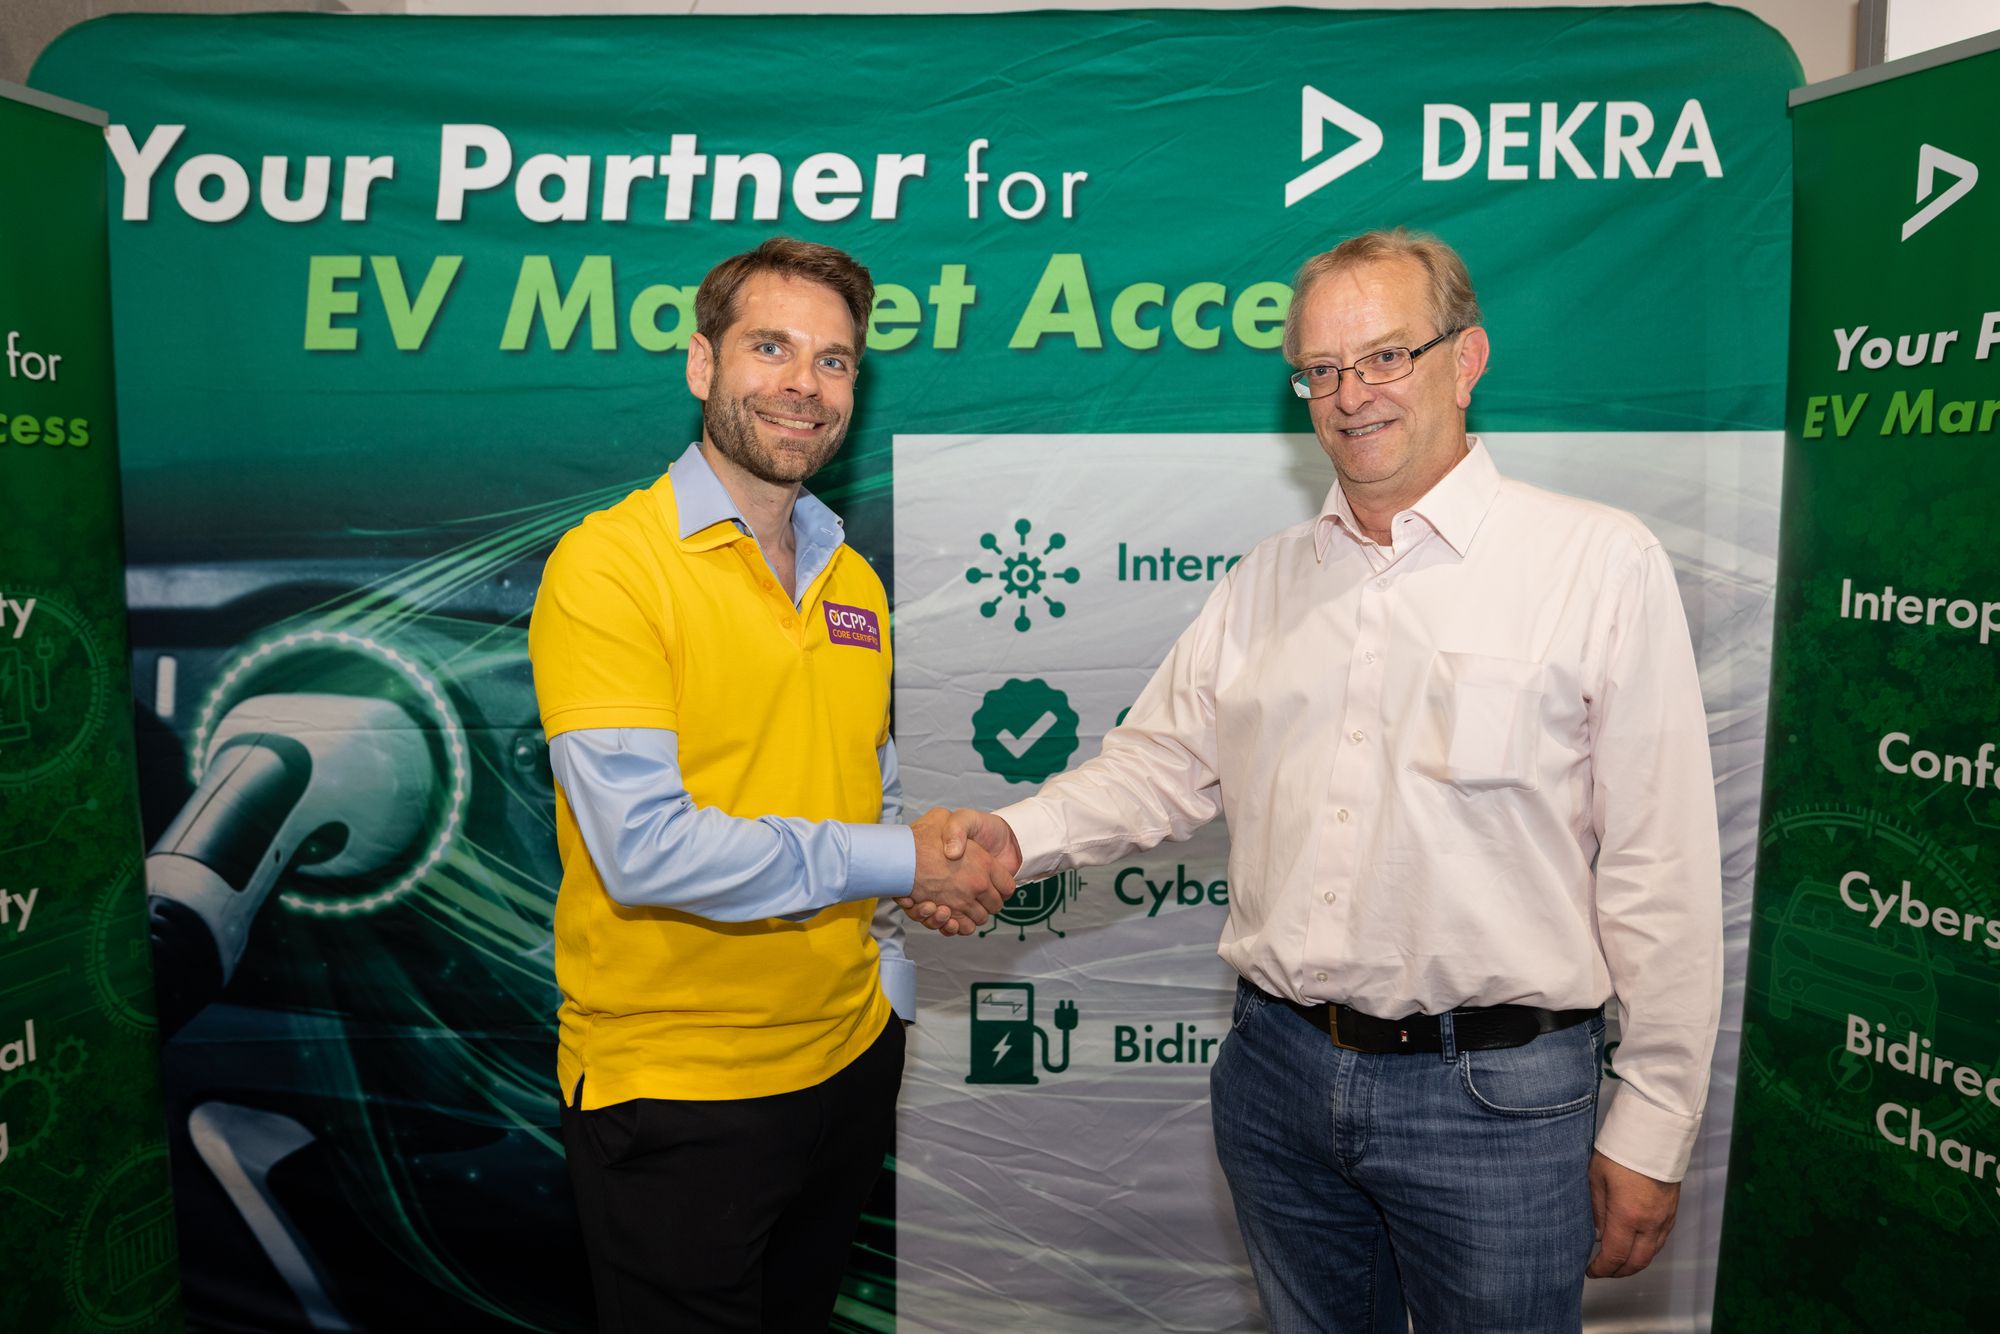 DEKRA and Switch are working together to improve testing and certification for EV charging